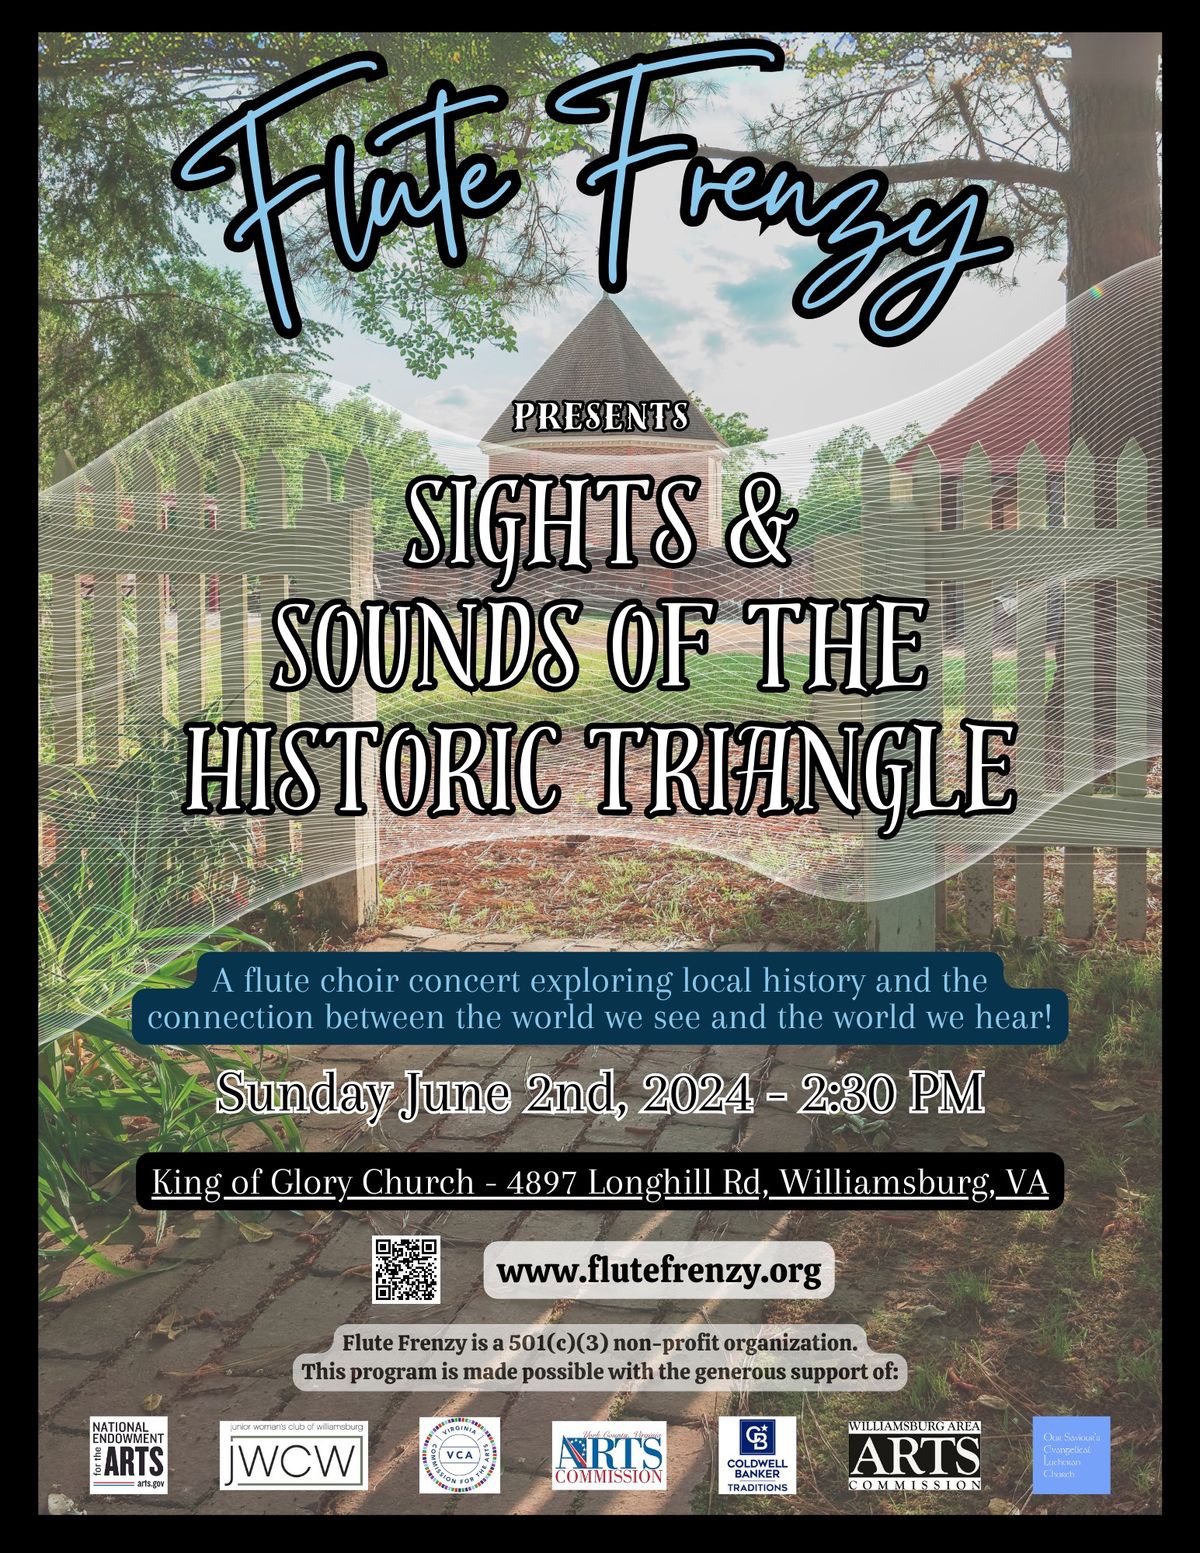 Flute Frenzy Presents: Sights and Sounds of the Historic Triangle